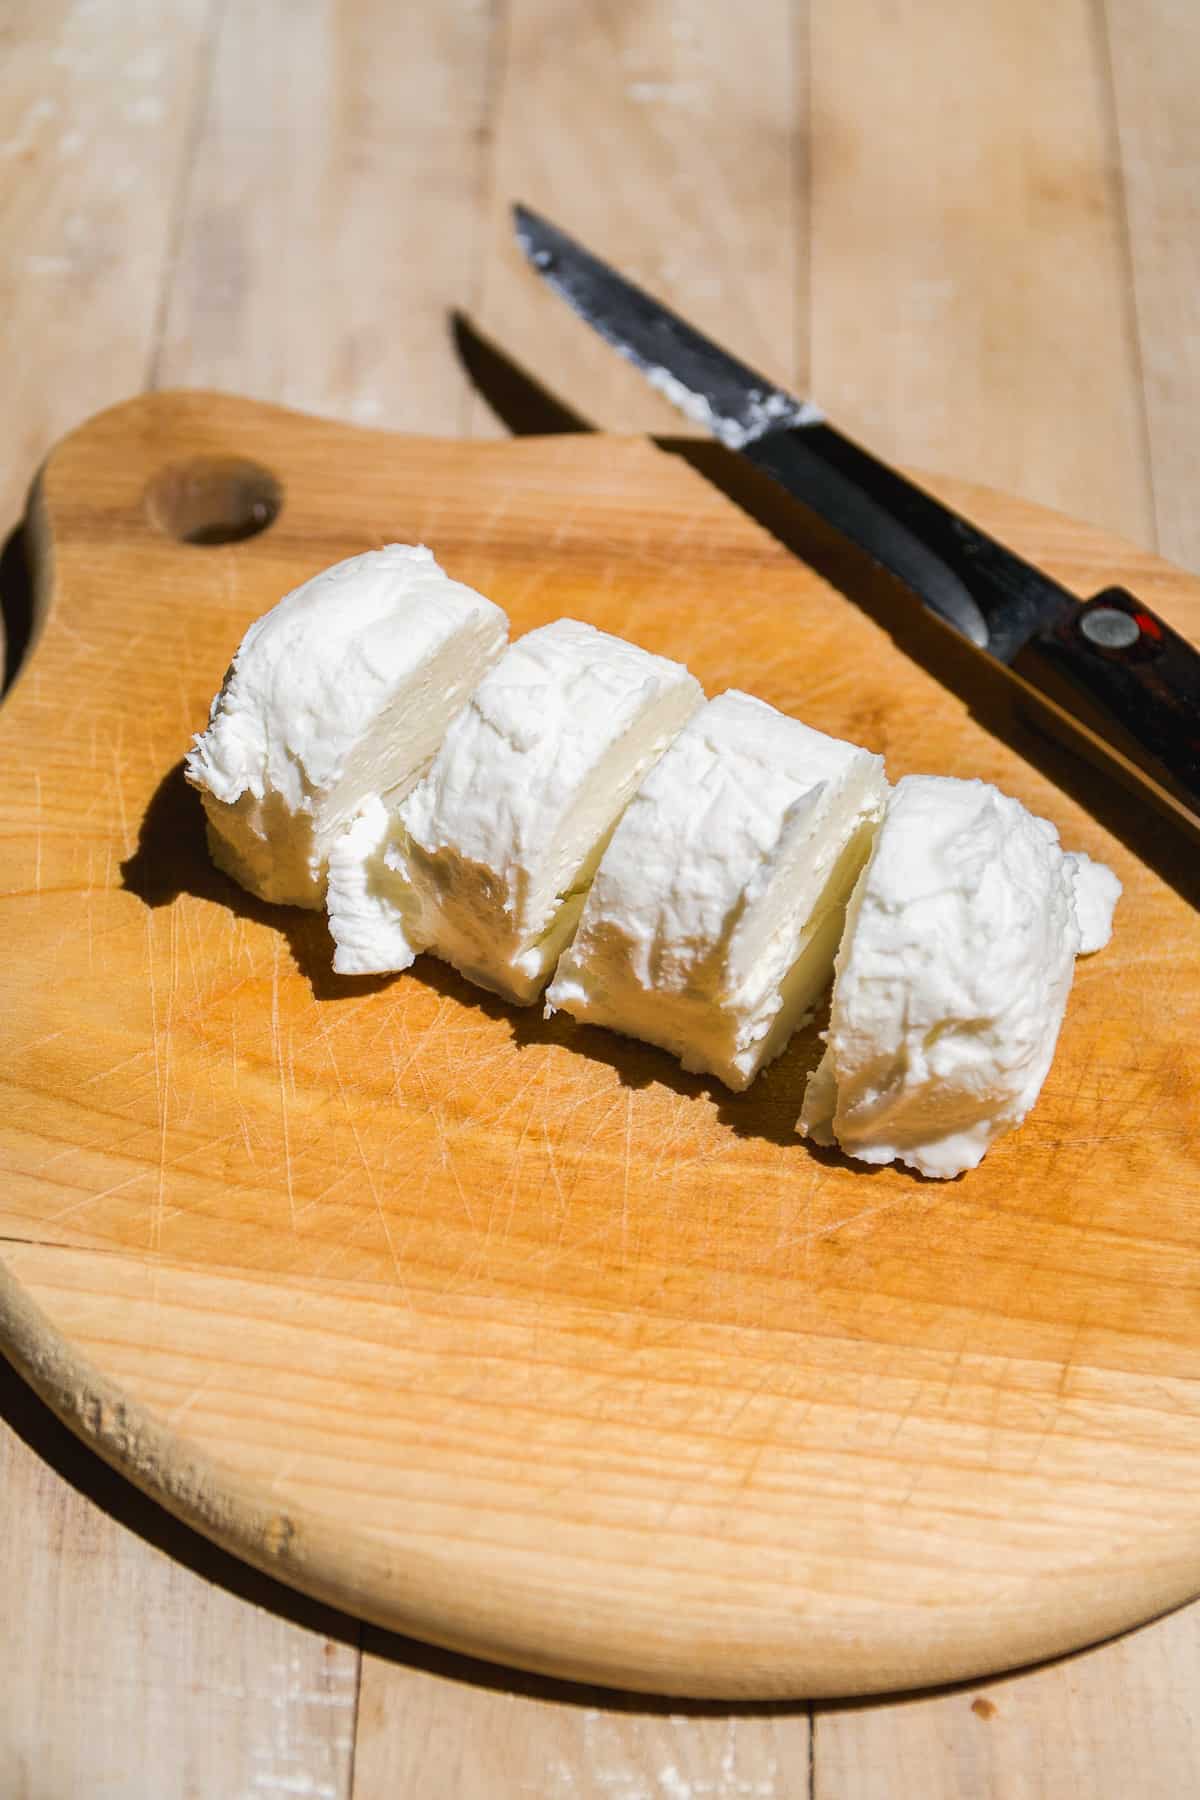 Goat cheese log cut into four pieces.